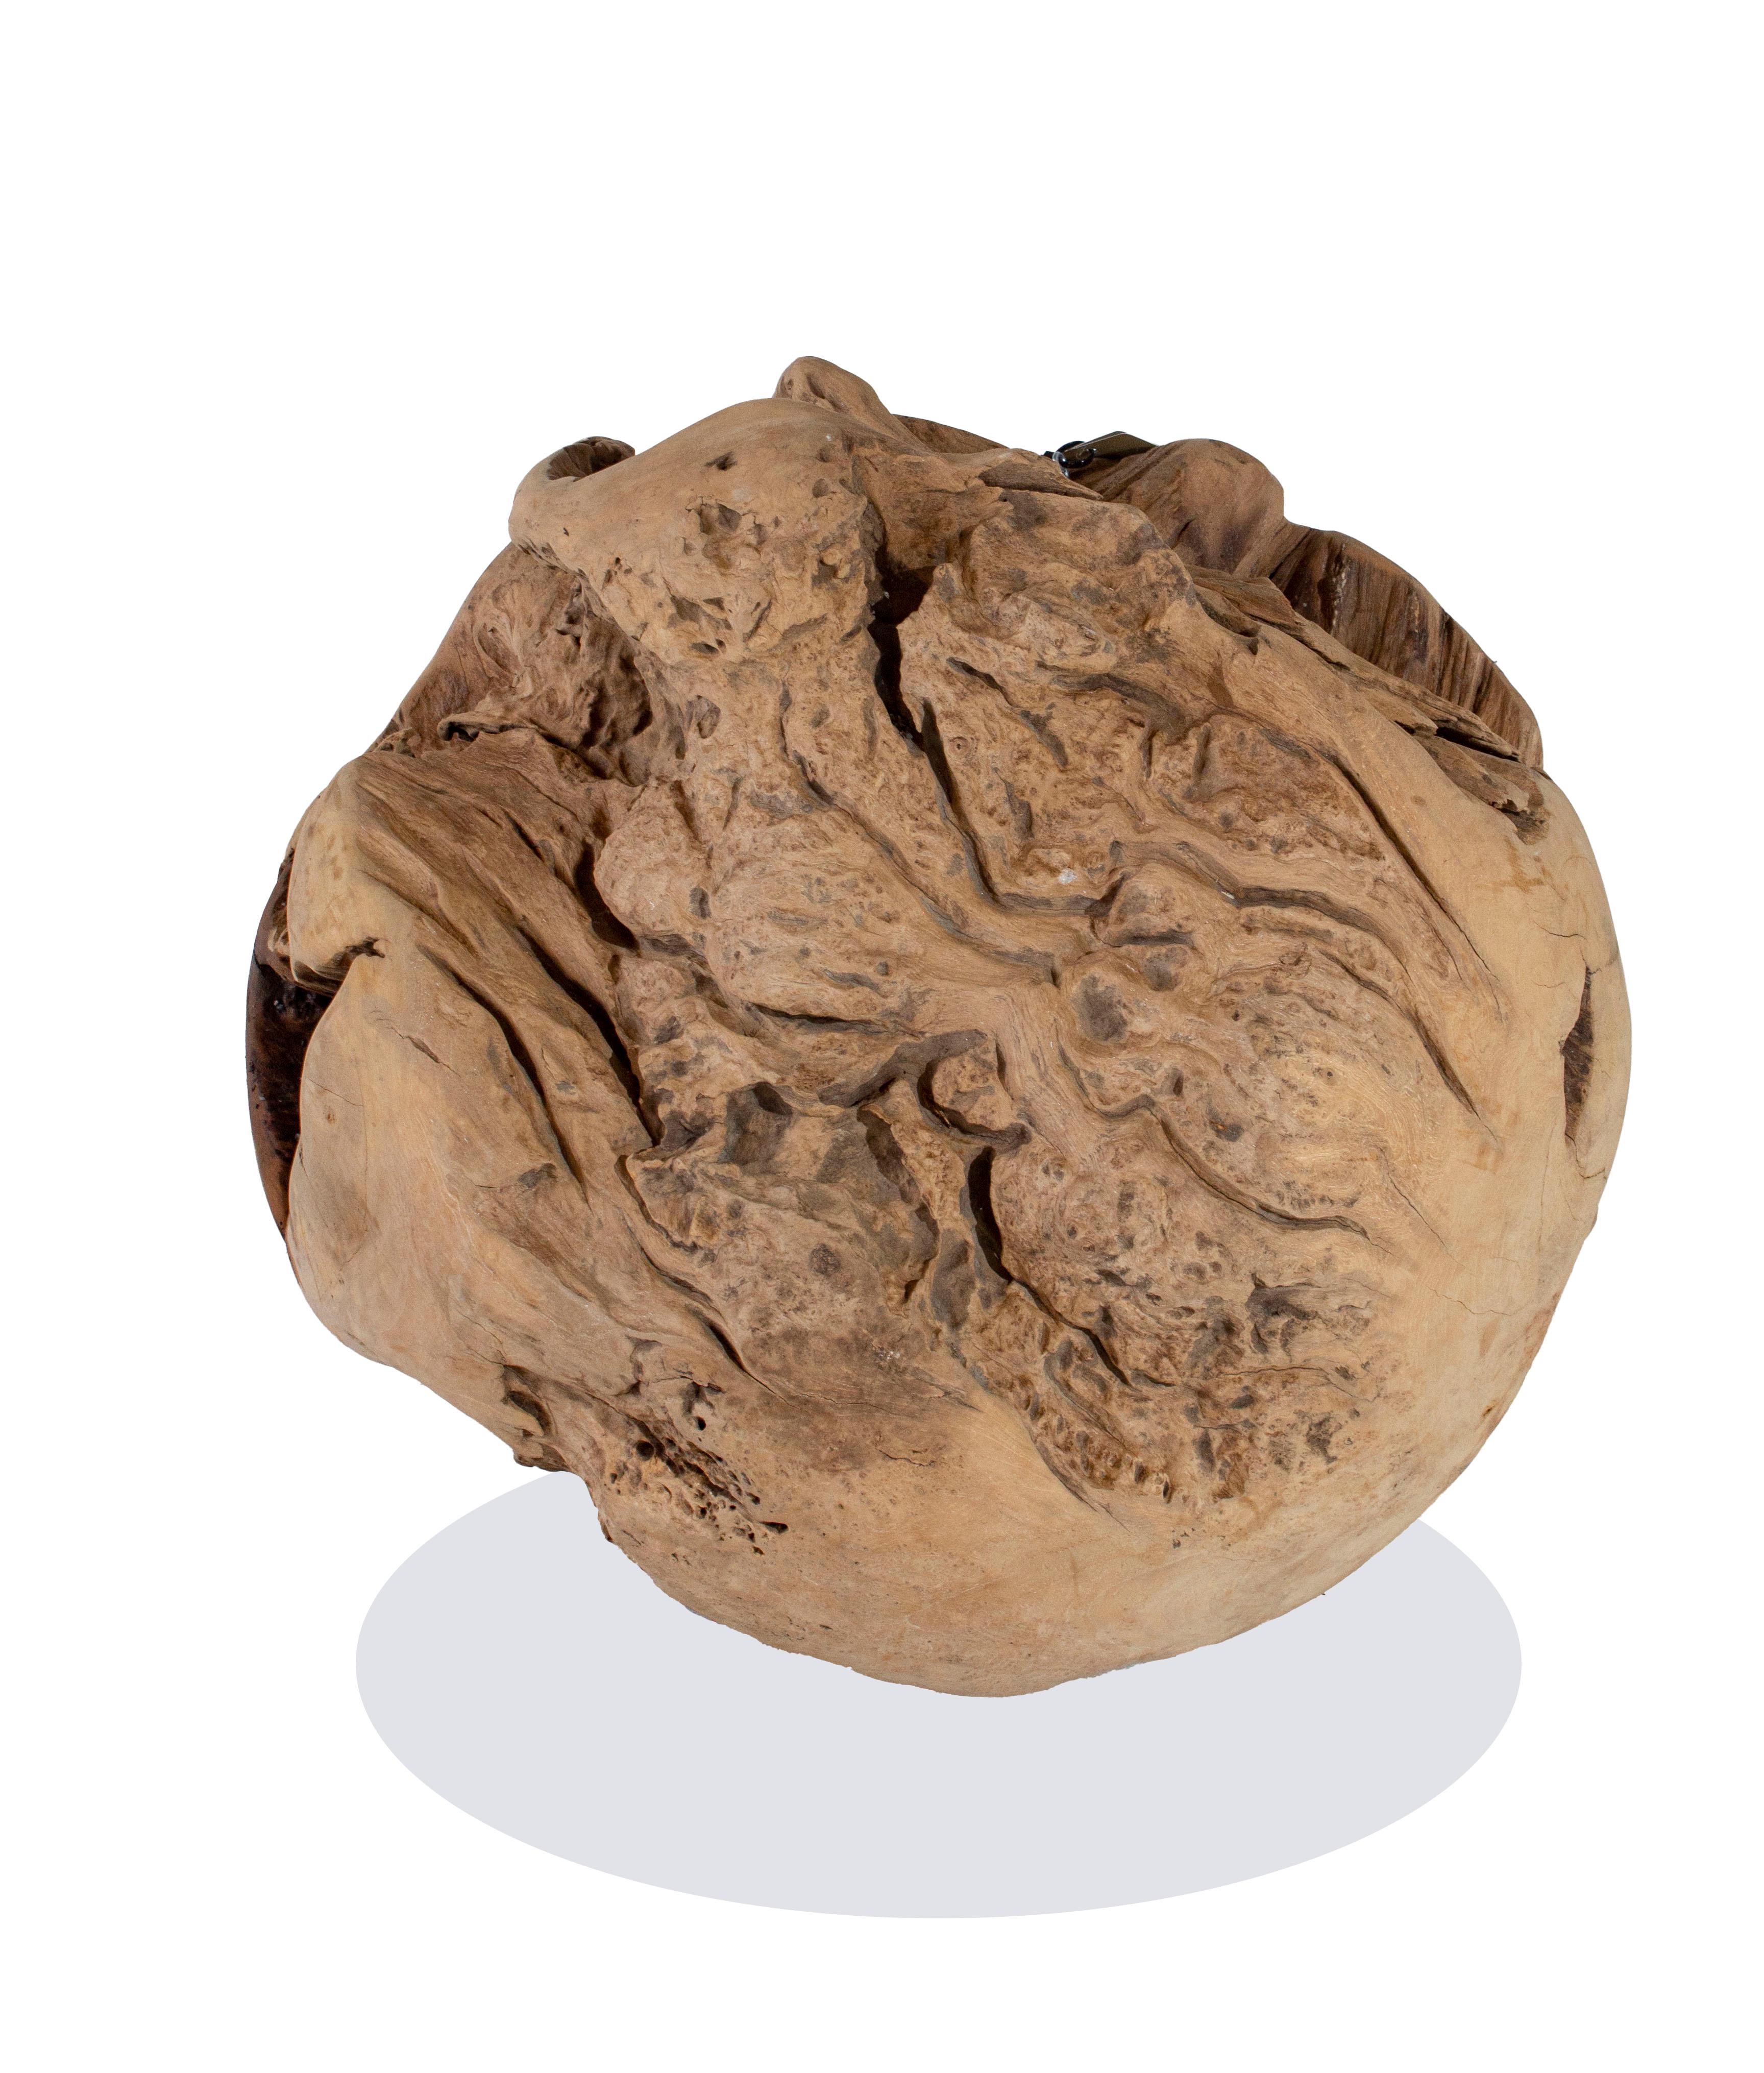 This teak ball is an outstanding decoration for your home or office. The large size and classic design make it an eye catching piece that will turn heads. Its durability makes it sure to last in any environment, indoors or out. Exceptionally sized